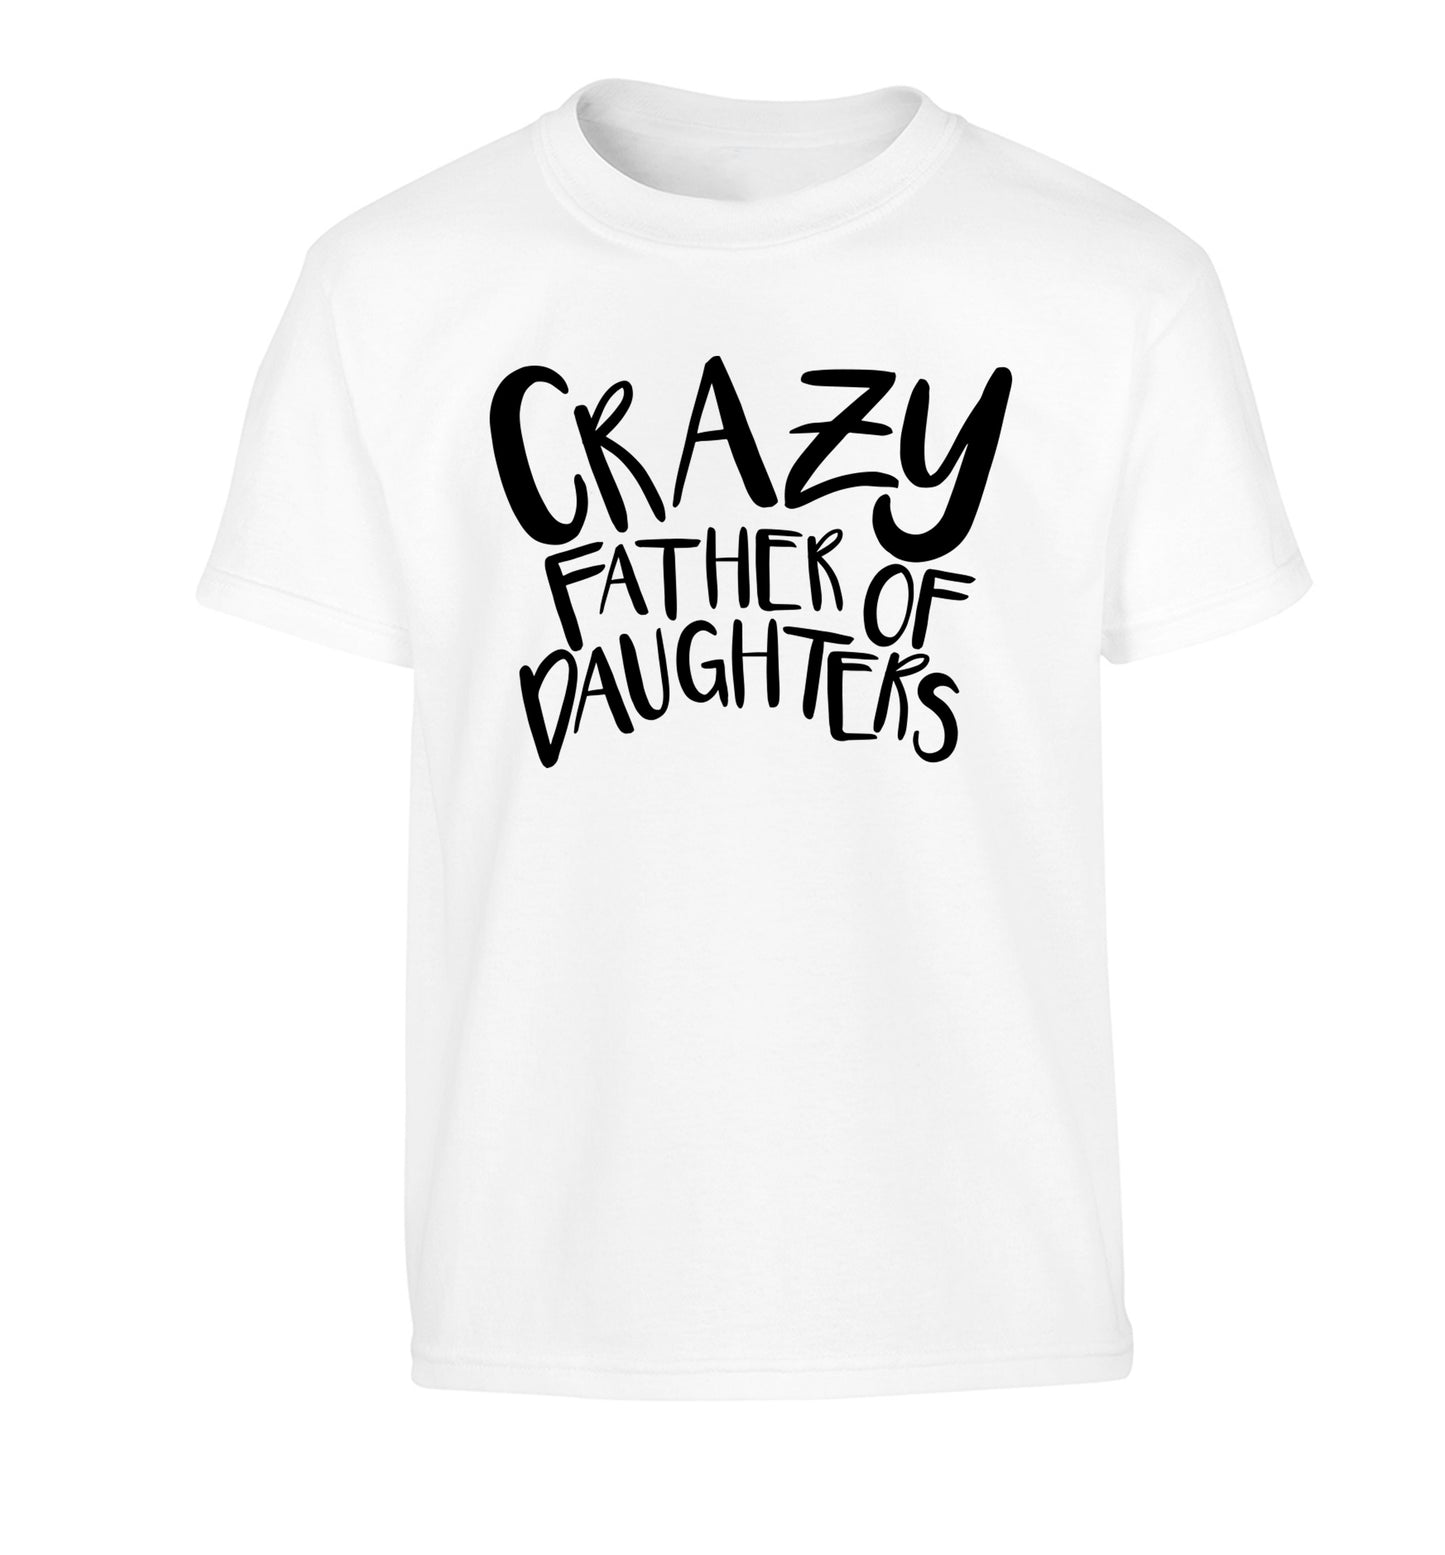 Crazy father of daughters Children's white Tshirt 12-13 Years